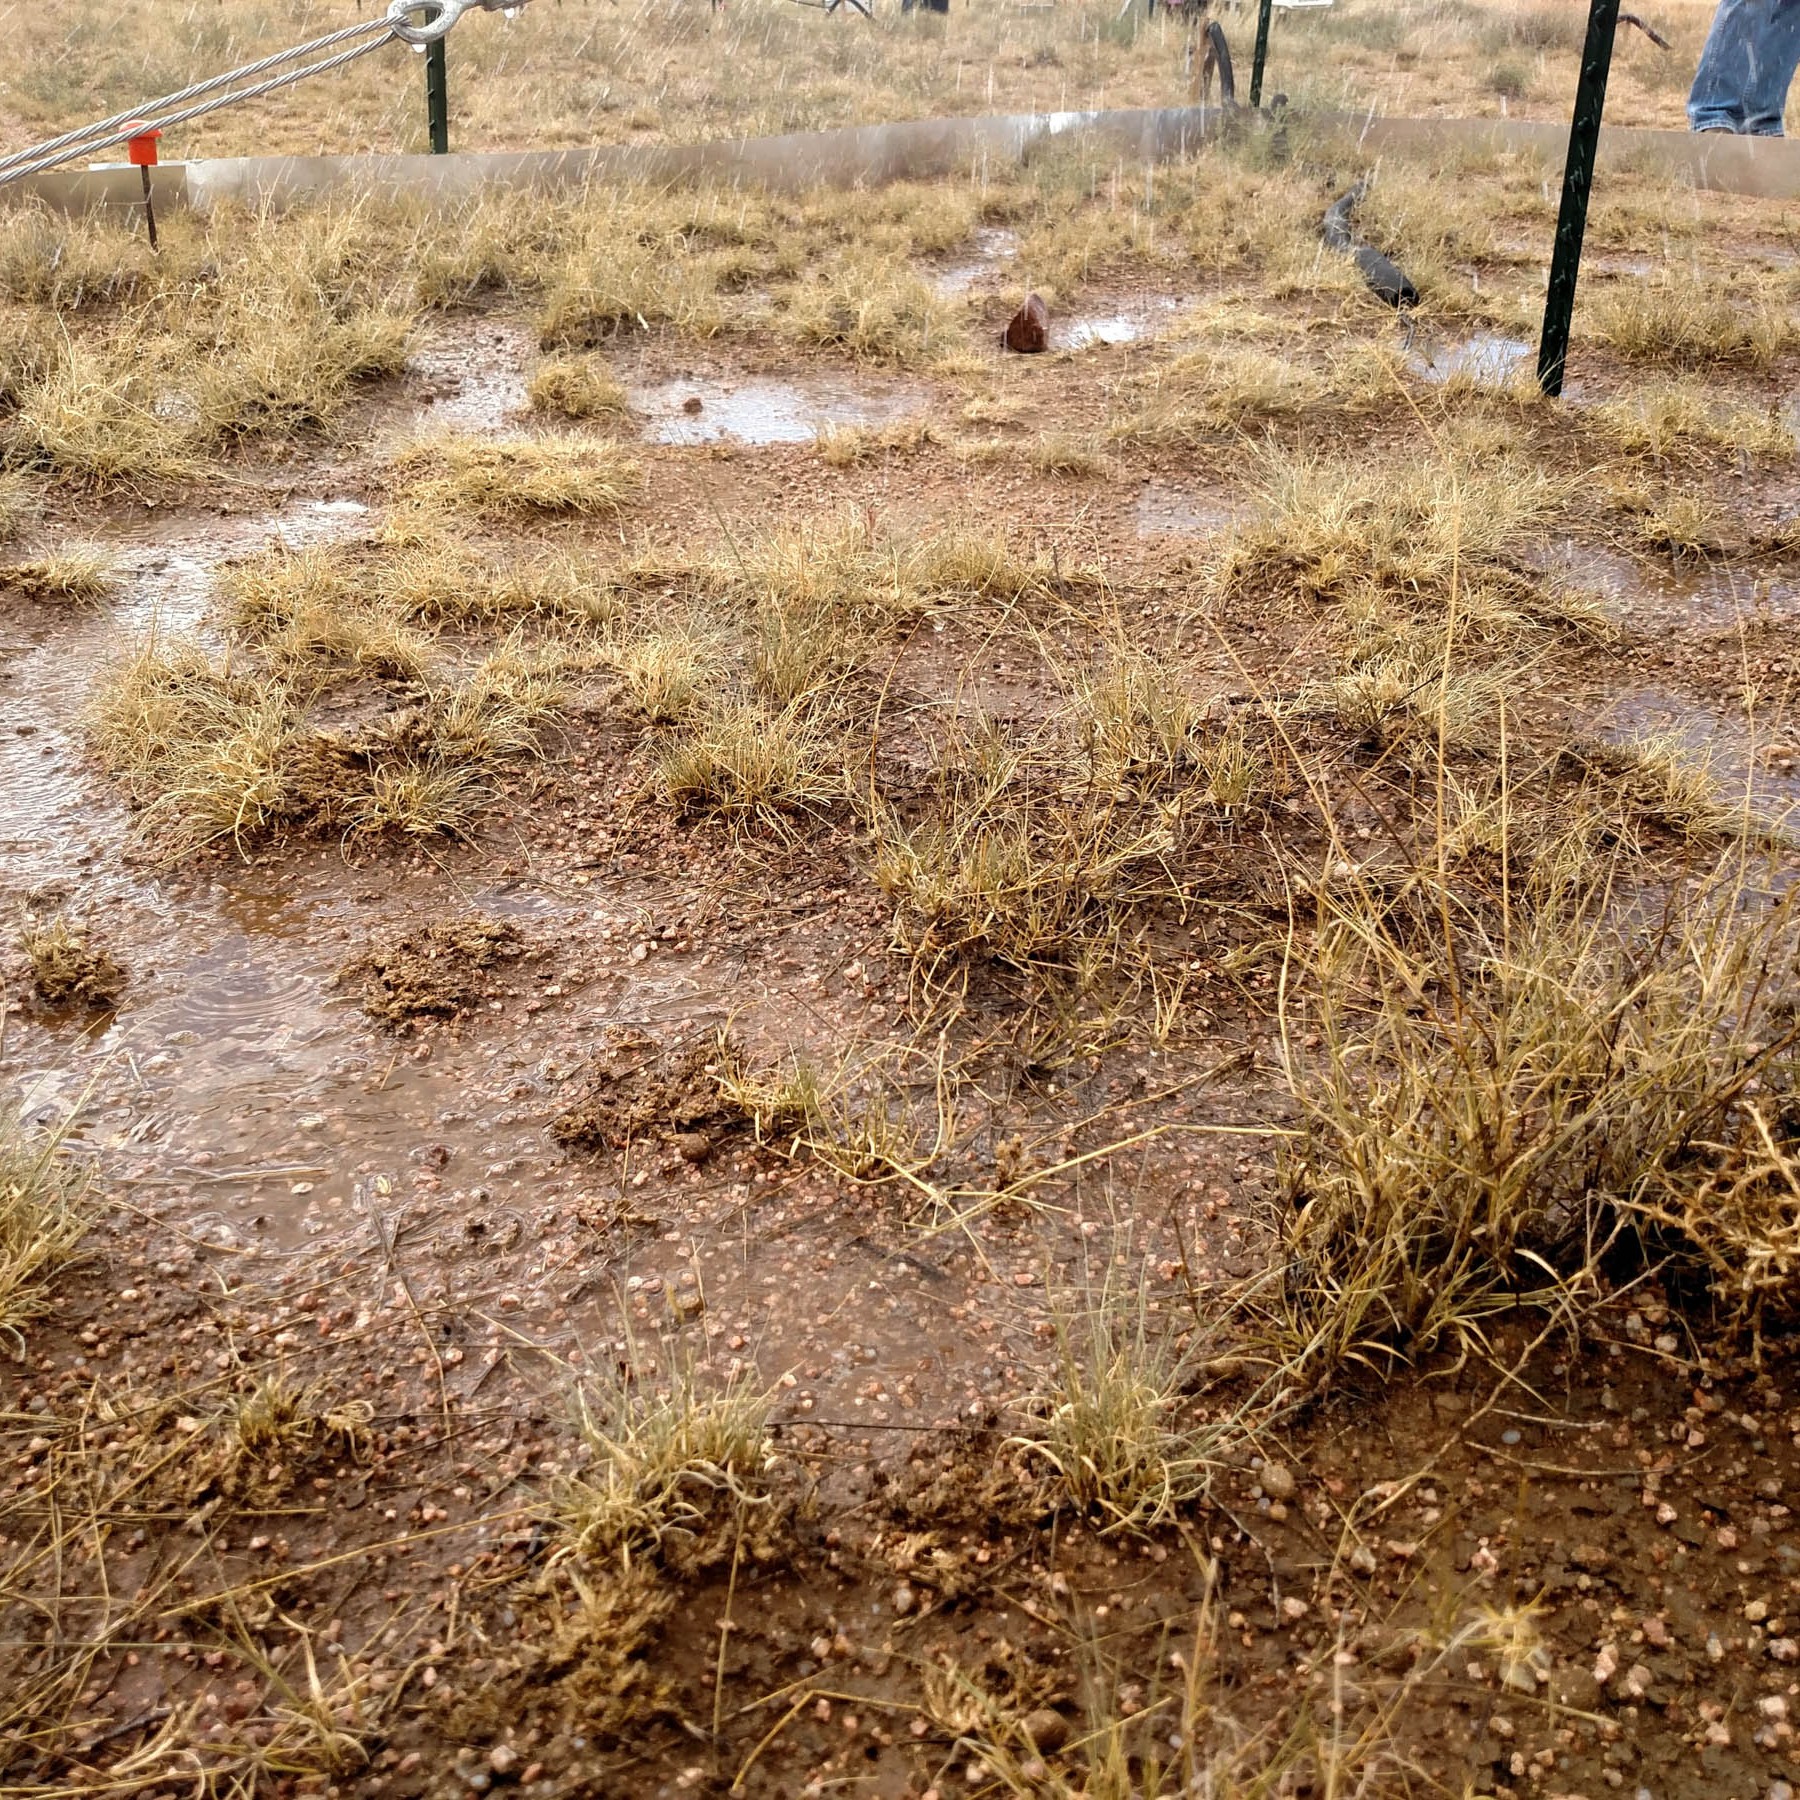 Water from the sprinklers of a mean-variance water addition plot pools between grasses, simulating rain.